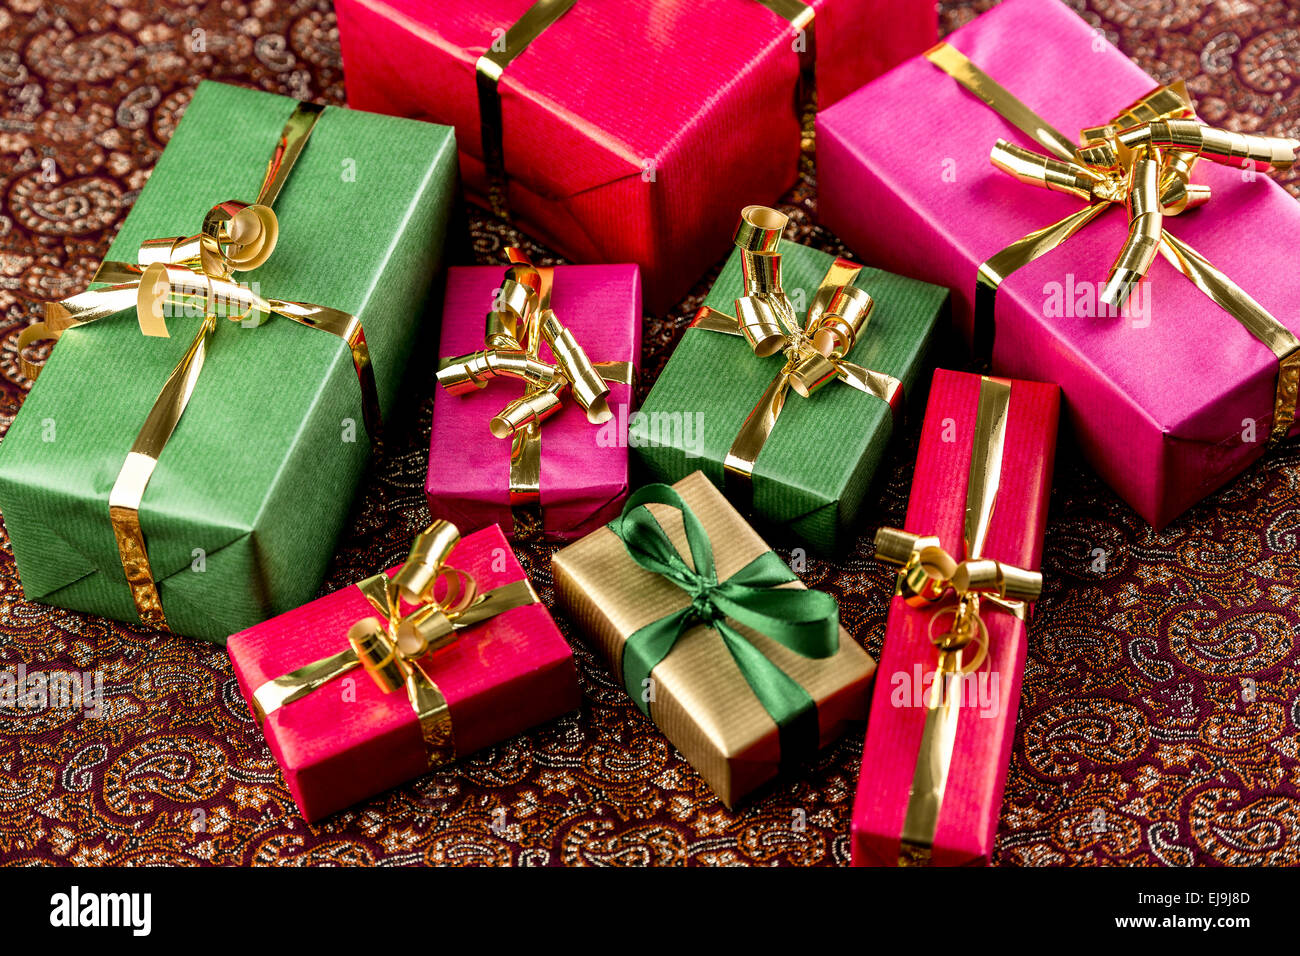 Gifts Wrapped in Vibrant Colors Stock Photo